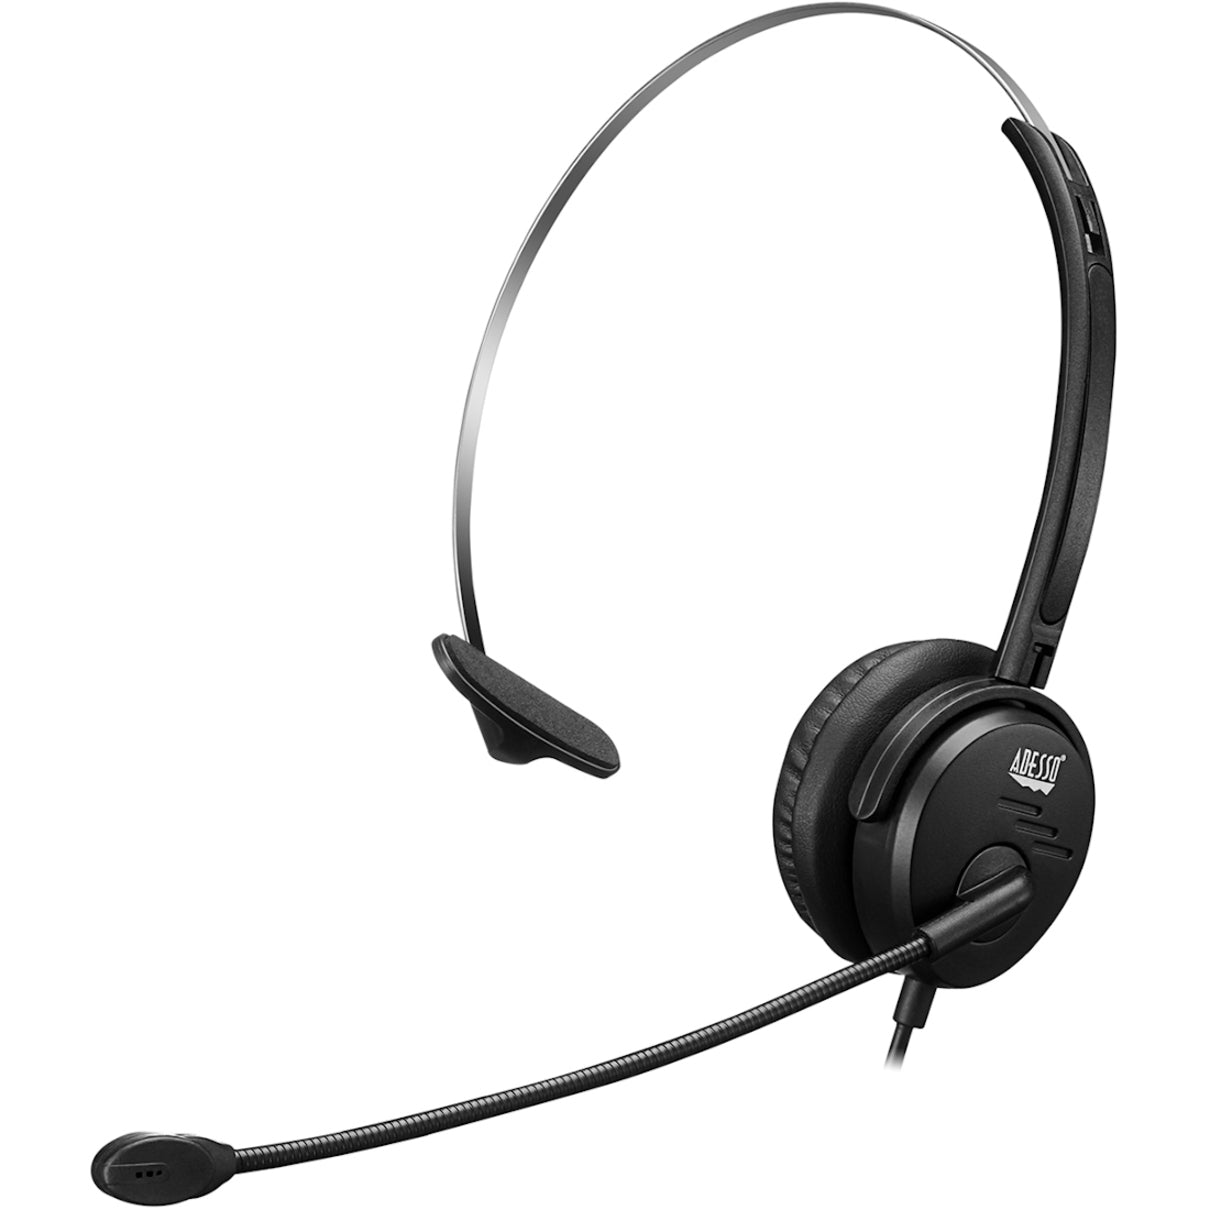 Adesso USB Single-Sided Headset with Adjustable Microphone- Noise Cancelling- Mono - USB - Wired - Over-the-head - 6 ft Cable - Omni-directional Microphone - Black